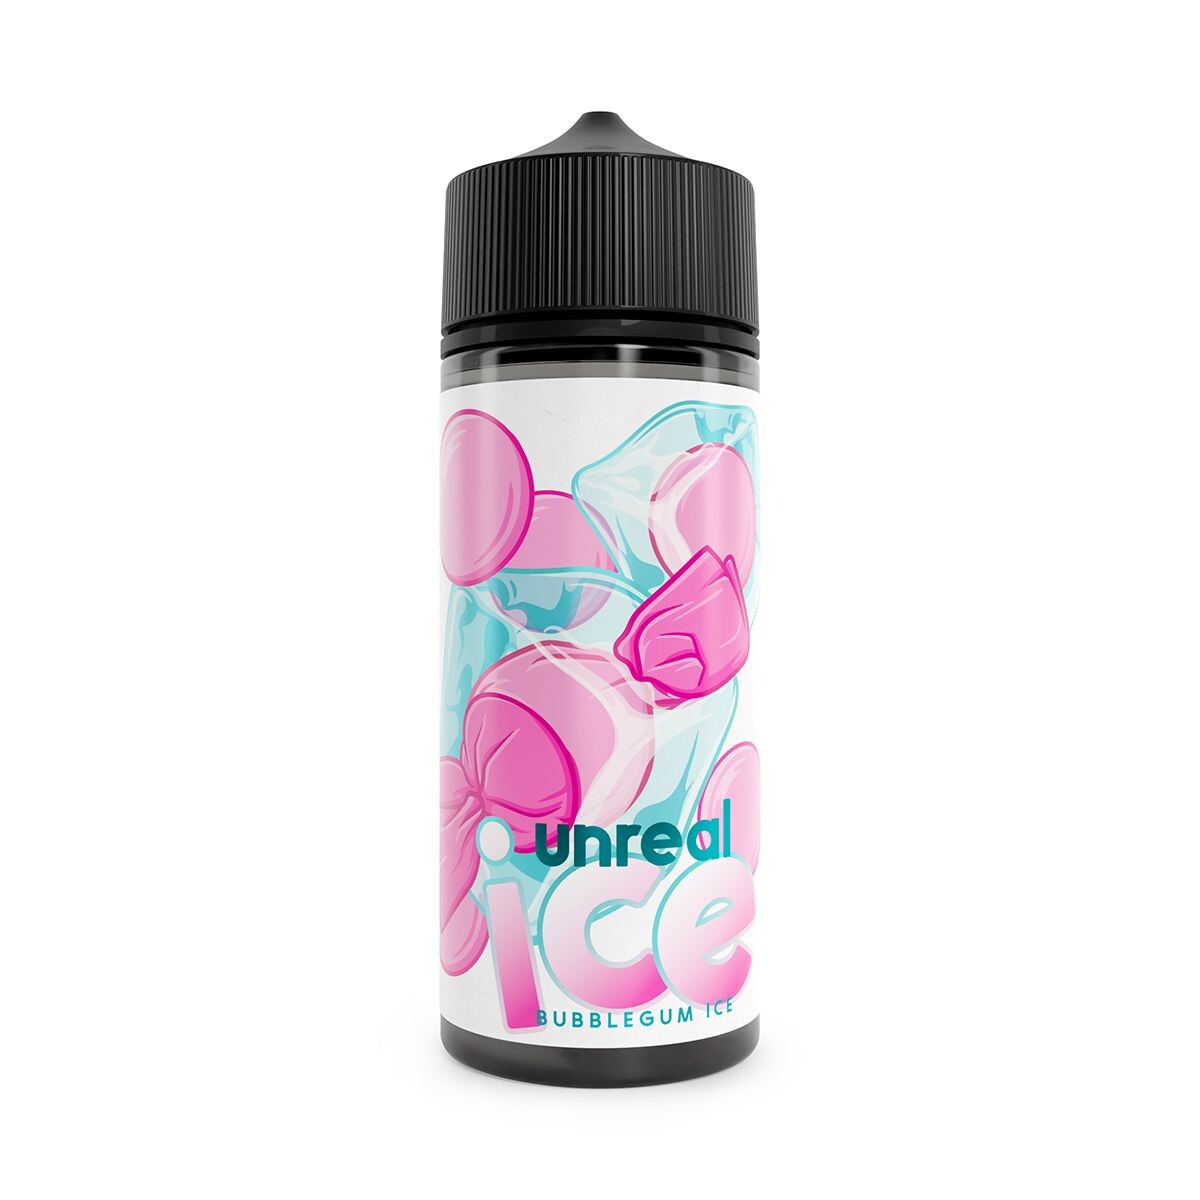 Unreal Ice Bubblegum Ice Shortfill, A Super Fresh Flavour Available At Dispergo Vaping UK